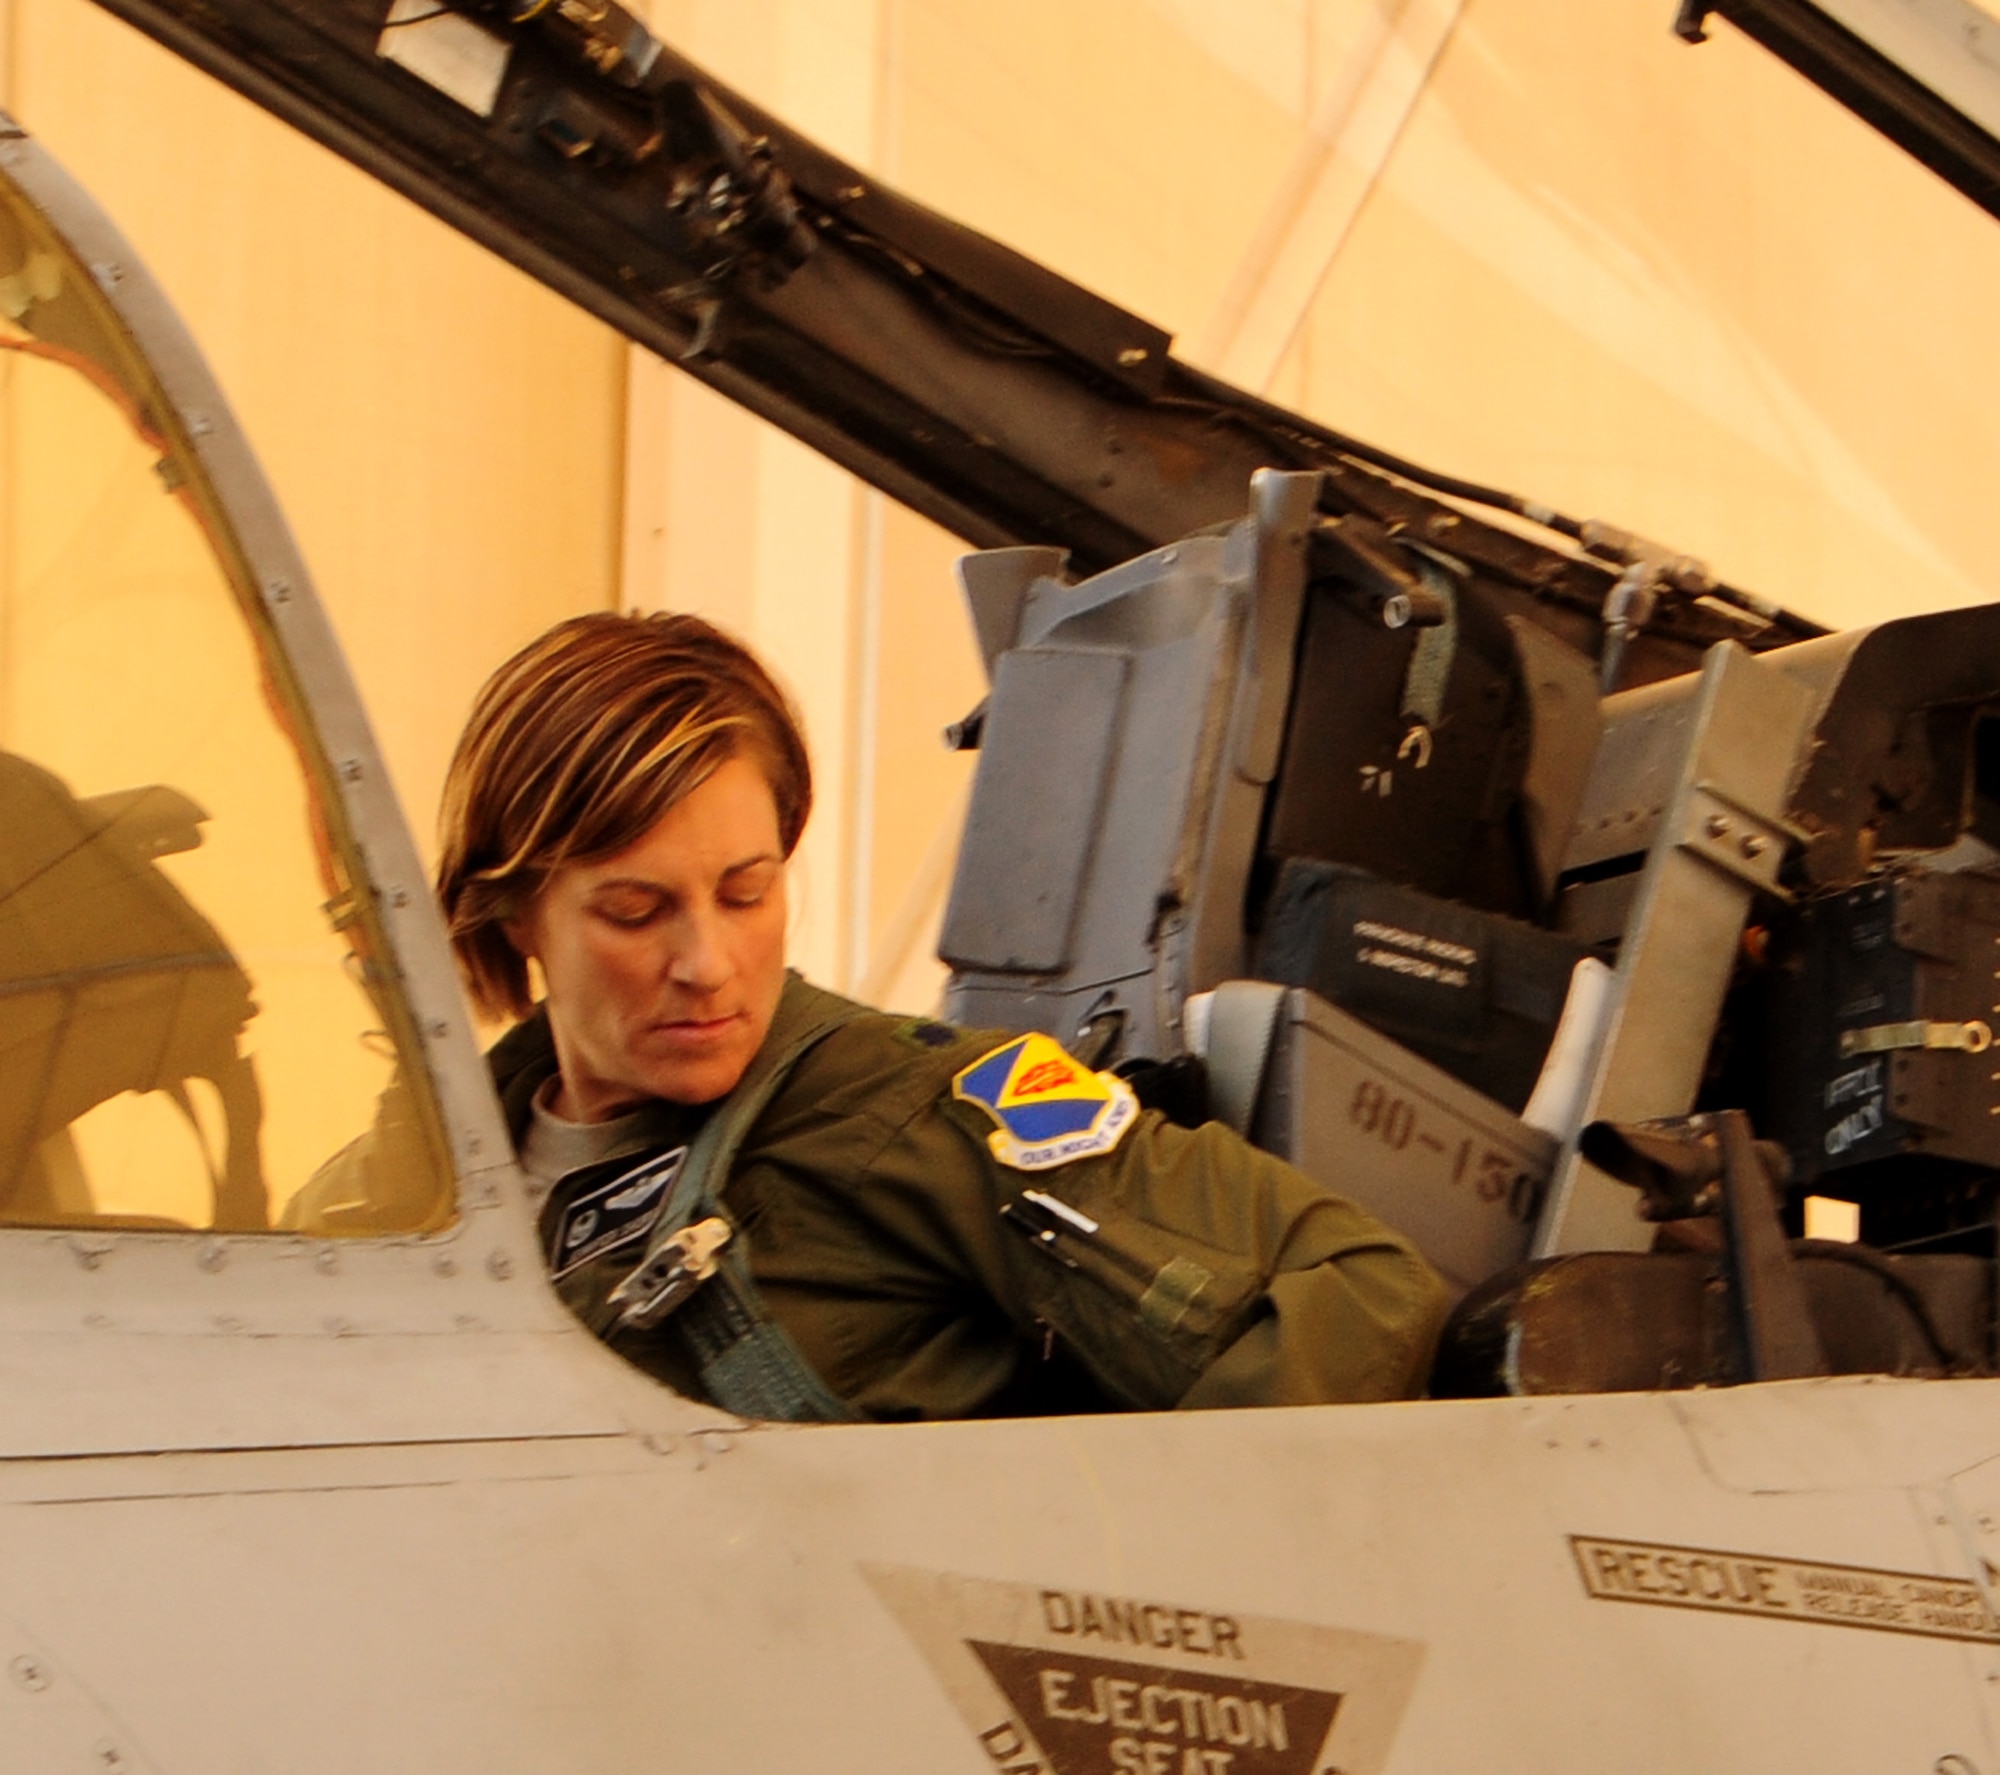 U.S. Air Force Lt. Co.l Jennifer Short, 358th Fighter Squadron commander, prepares for a training flight on an A-10 Thunderbolt II at Davis-Monthan Air Force Base, Ariz., March 27, 2013. Lt. Col Short is preparing for a training flight as an instructor pilot. (U.S. Air Force photo by Senior Airman Camilla Griffin/Released)